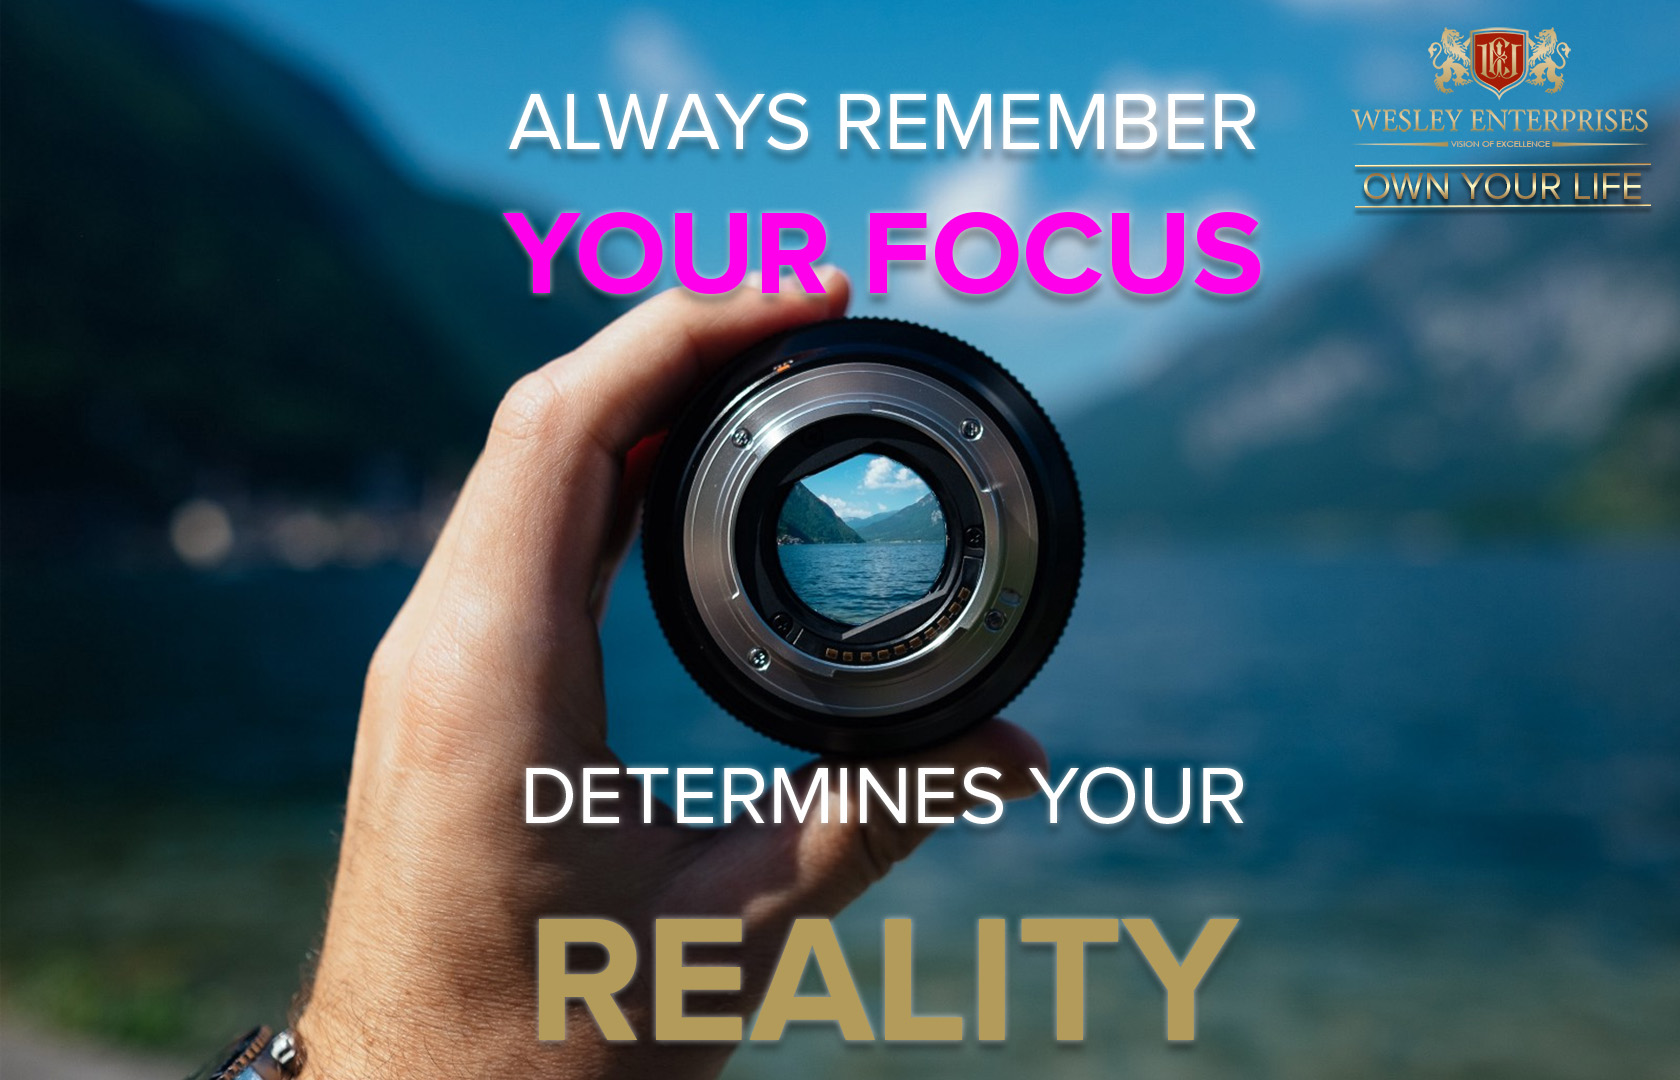 Your focus determines your reality